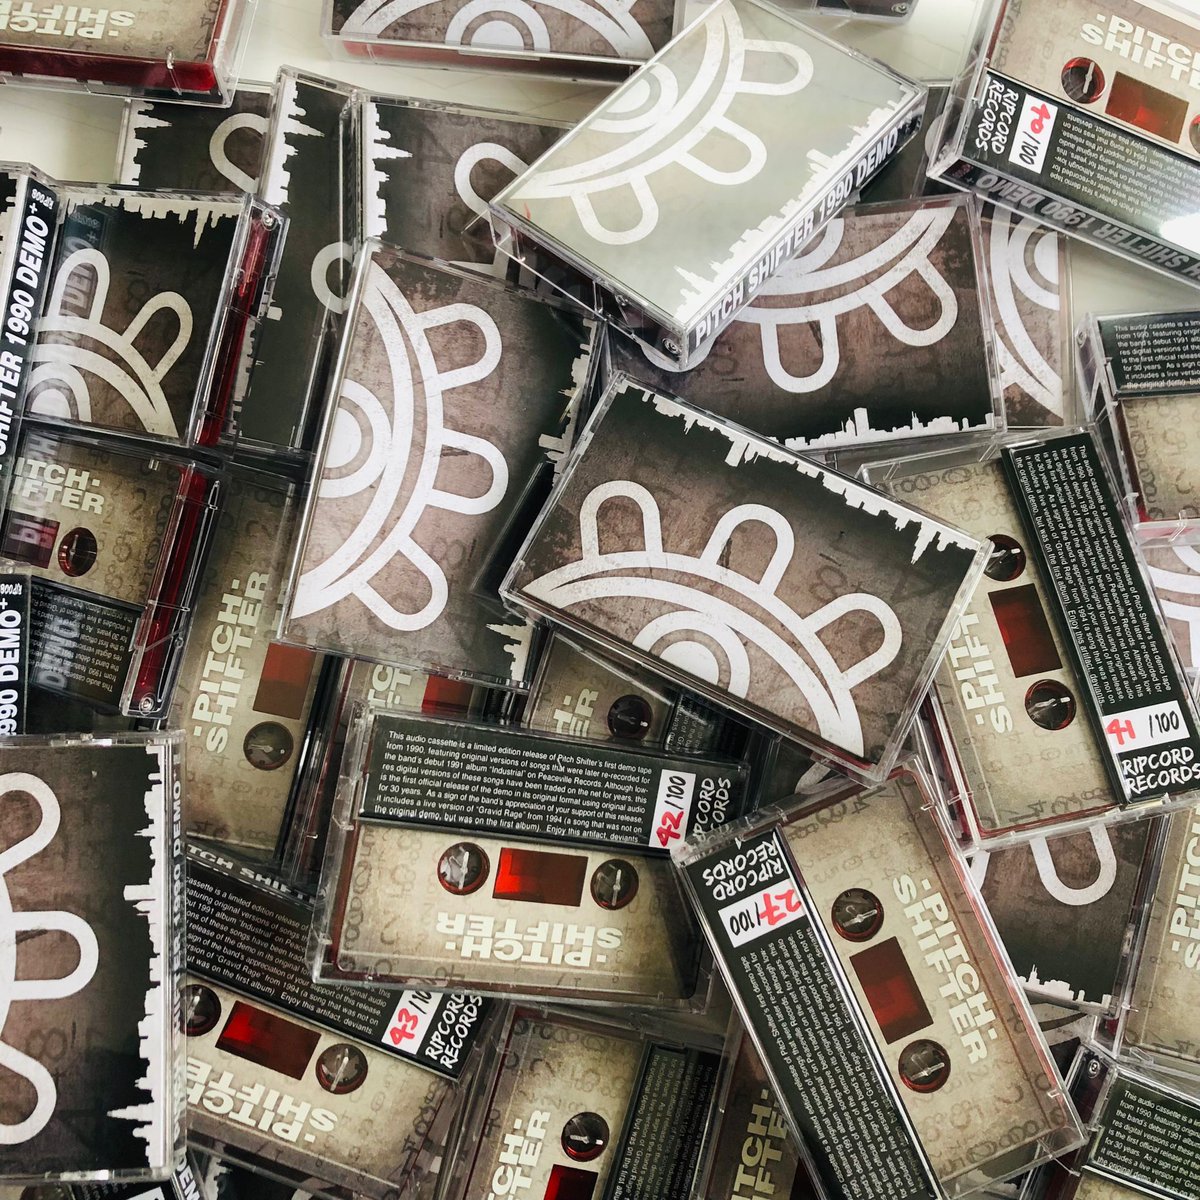 Pitchshifter 'The 1990 Demo+' @Kickstarter update: Campaign-exclusive, limited-edition hand-numbered cassettes are in the house! buff.ly/3Sa7Nvl